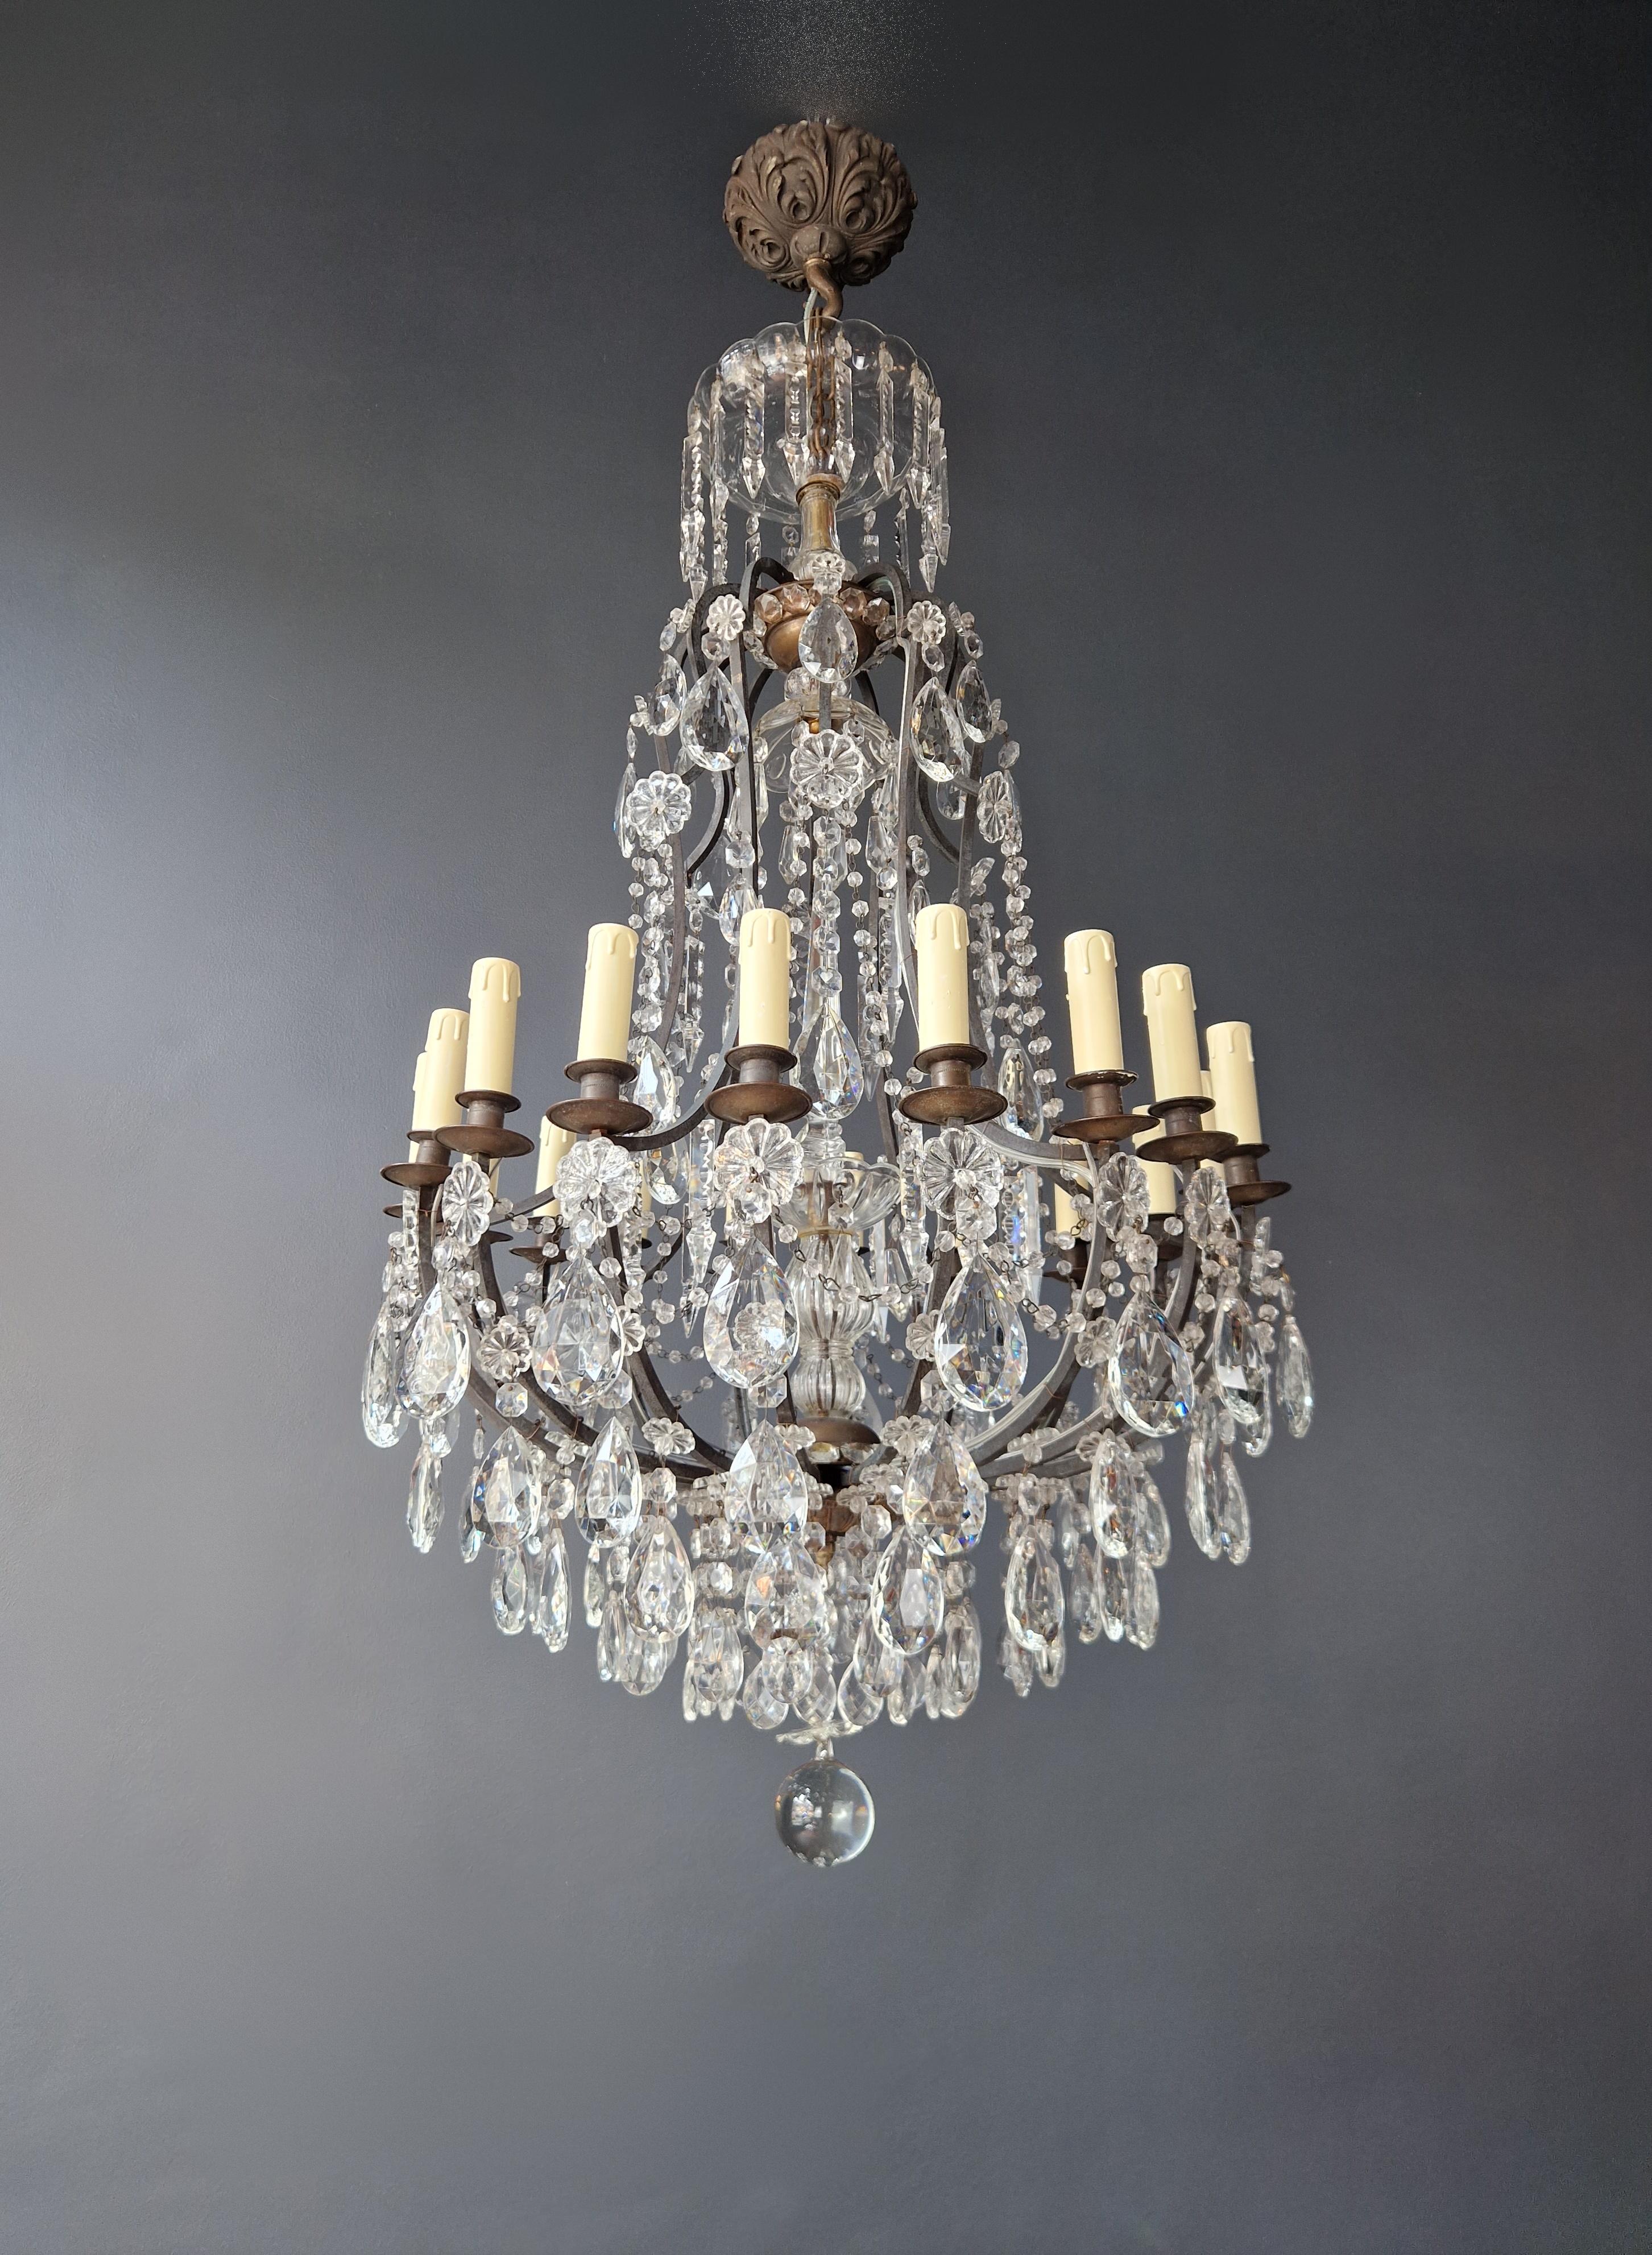 Antique French Crystal Chandelier Ceiling Lamp Lustre Art Nouveau Lamp In Good Condition For Sale In Berlin, DE